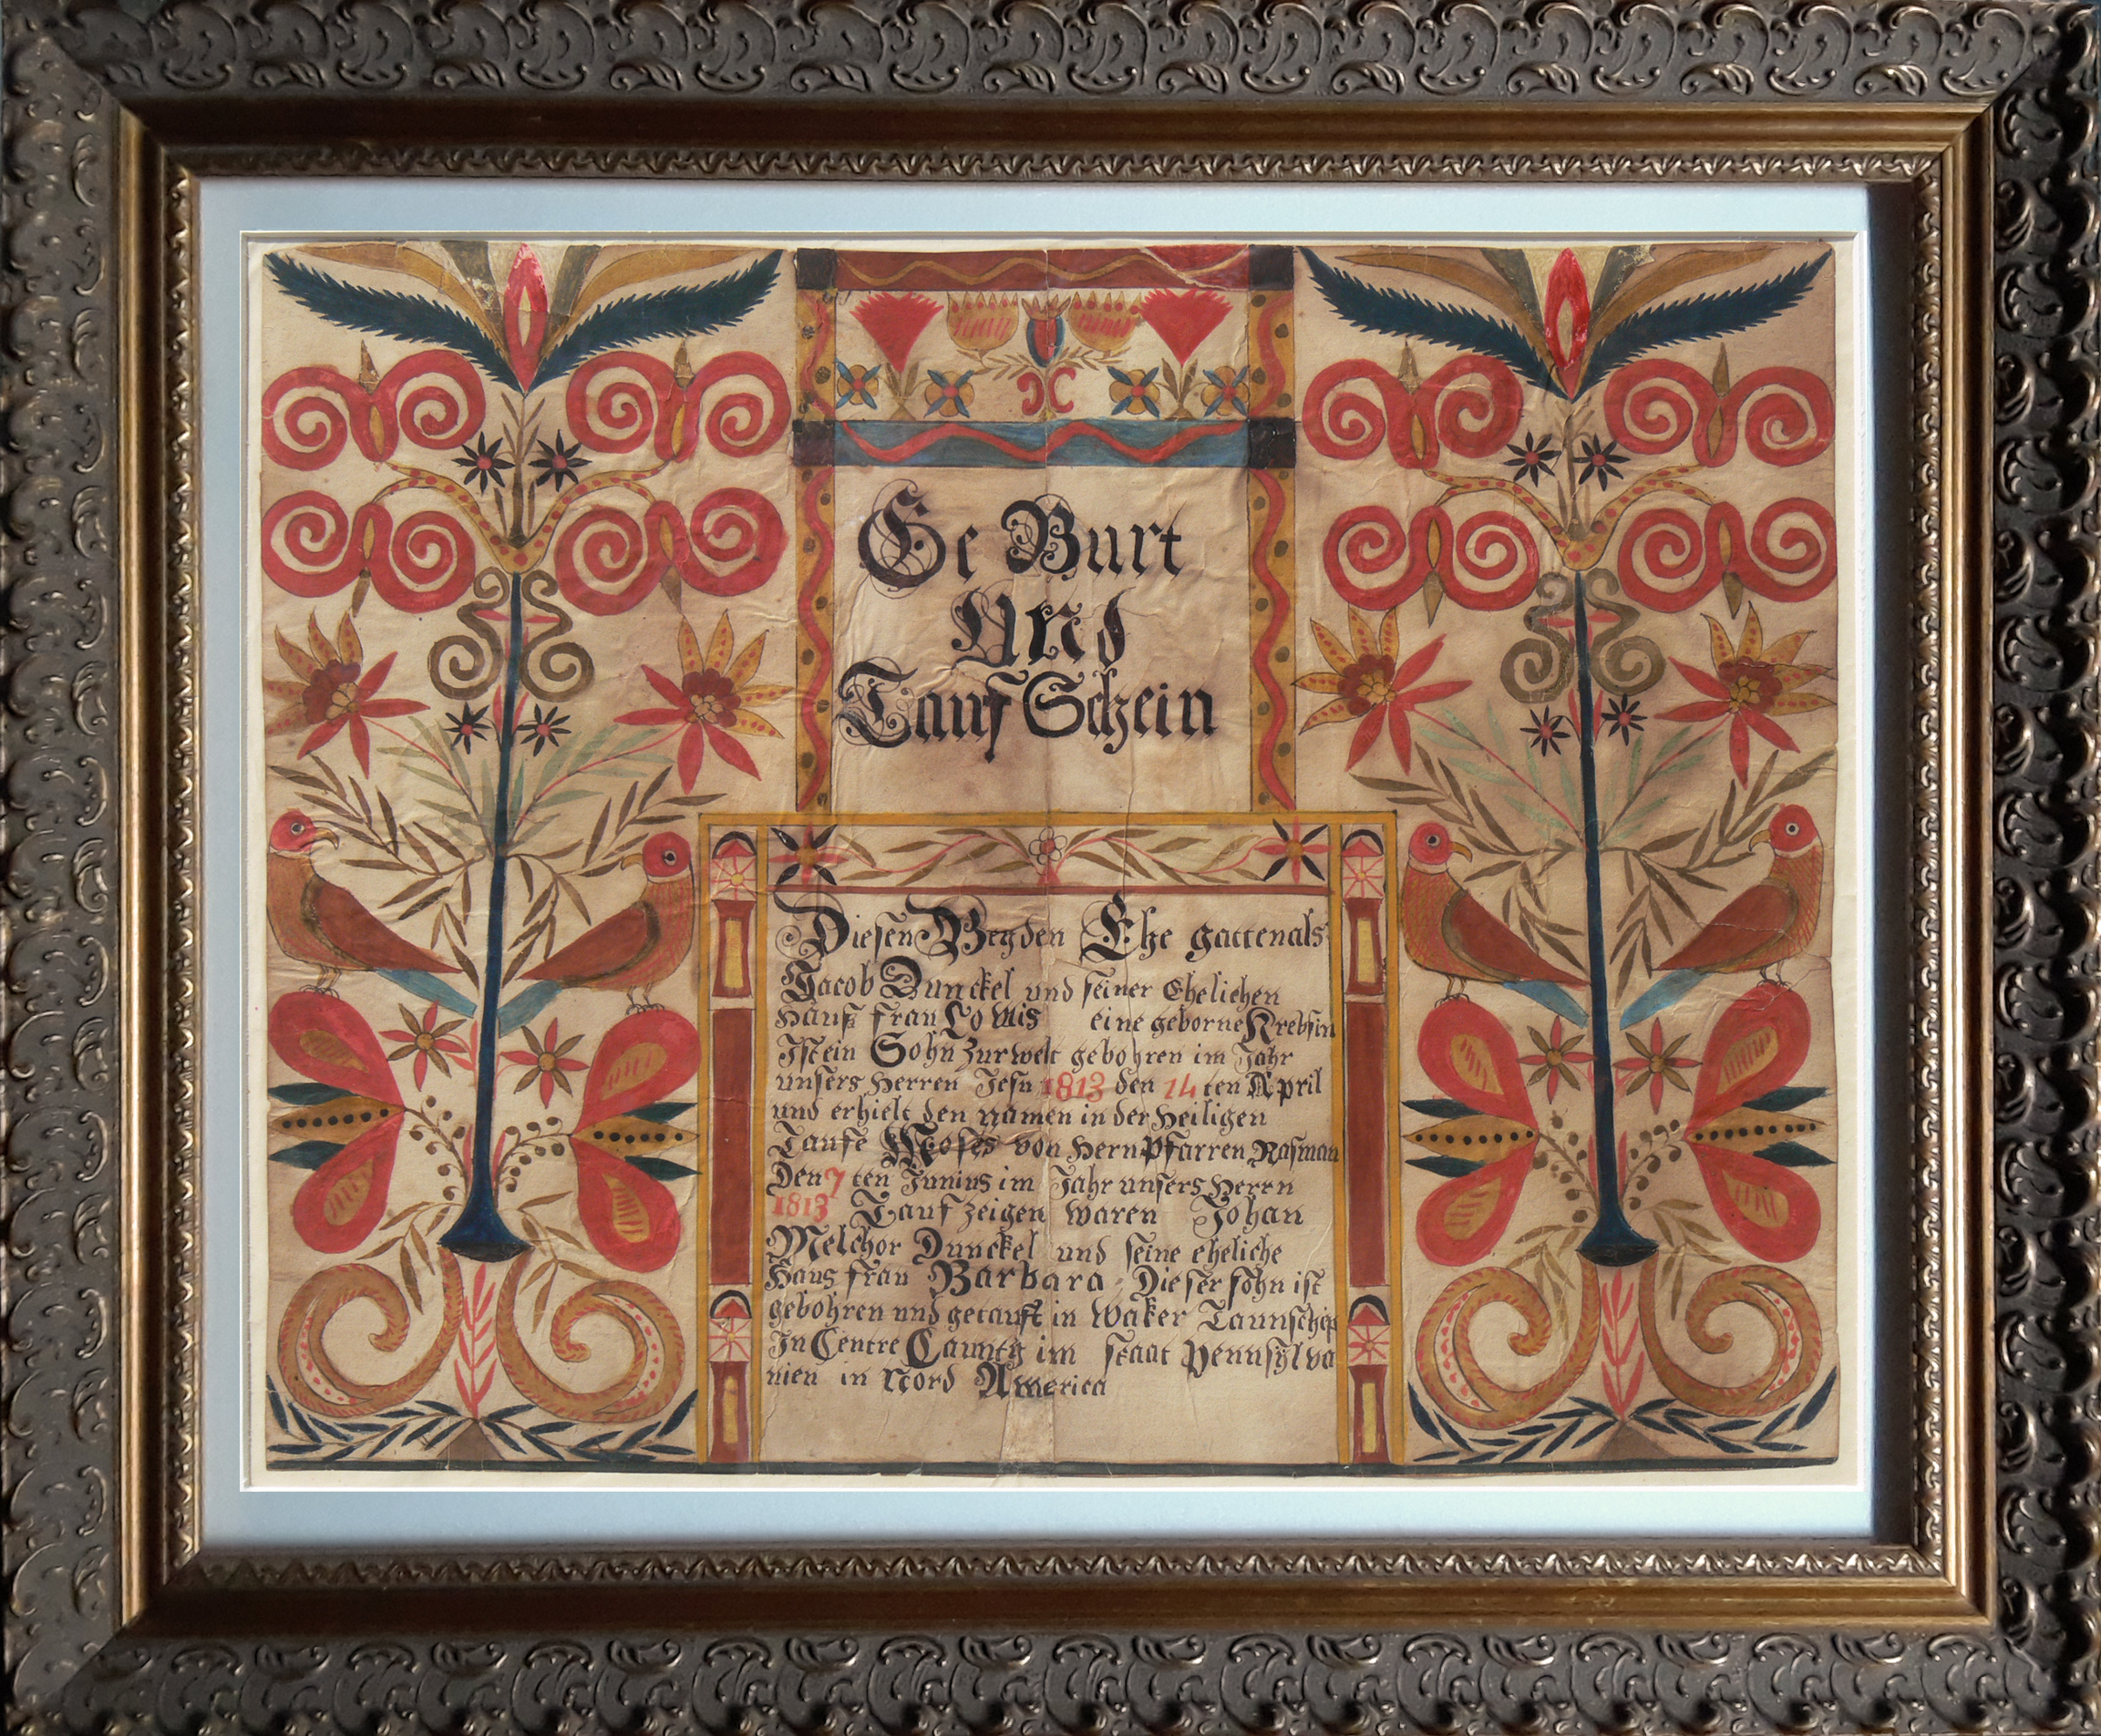 This baptismal certificate is held in an ornate frame. The document has dark ink German script, with important dates written in red ink. There are two sets of birds on either side of the centered text. They are colored in red, blue, and shades of yellow. These birds sit on floral motifs in similar colors, with additional flower and leaf motifs above. The centered text is bordered with boxes decorated columns, zigzags, and flowers.